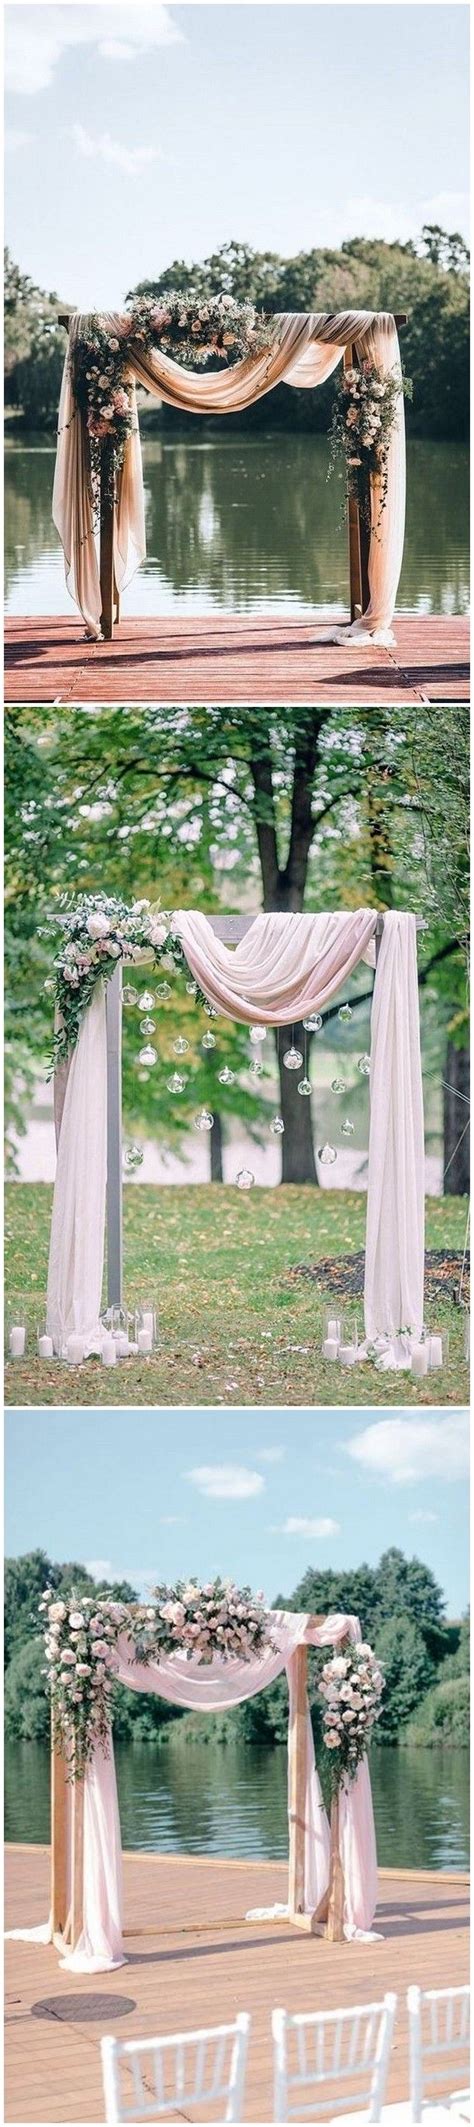 20 Wedding Arches With Drapery Fabric In 2020 Wedding Arches Outdoors